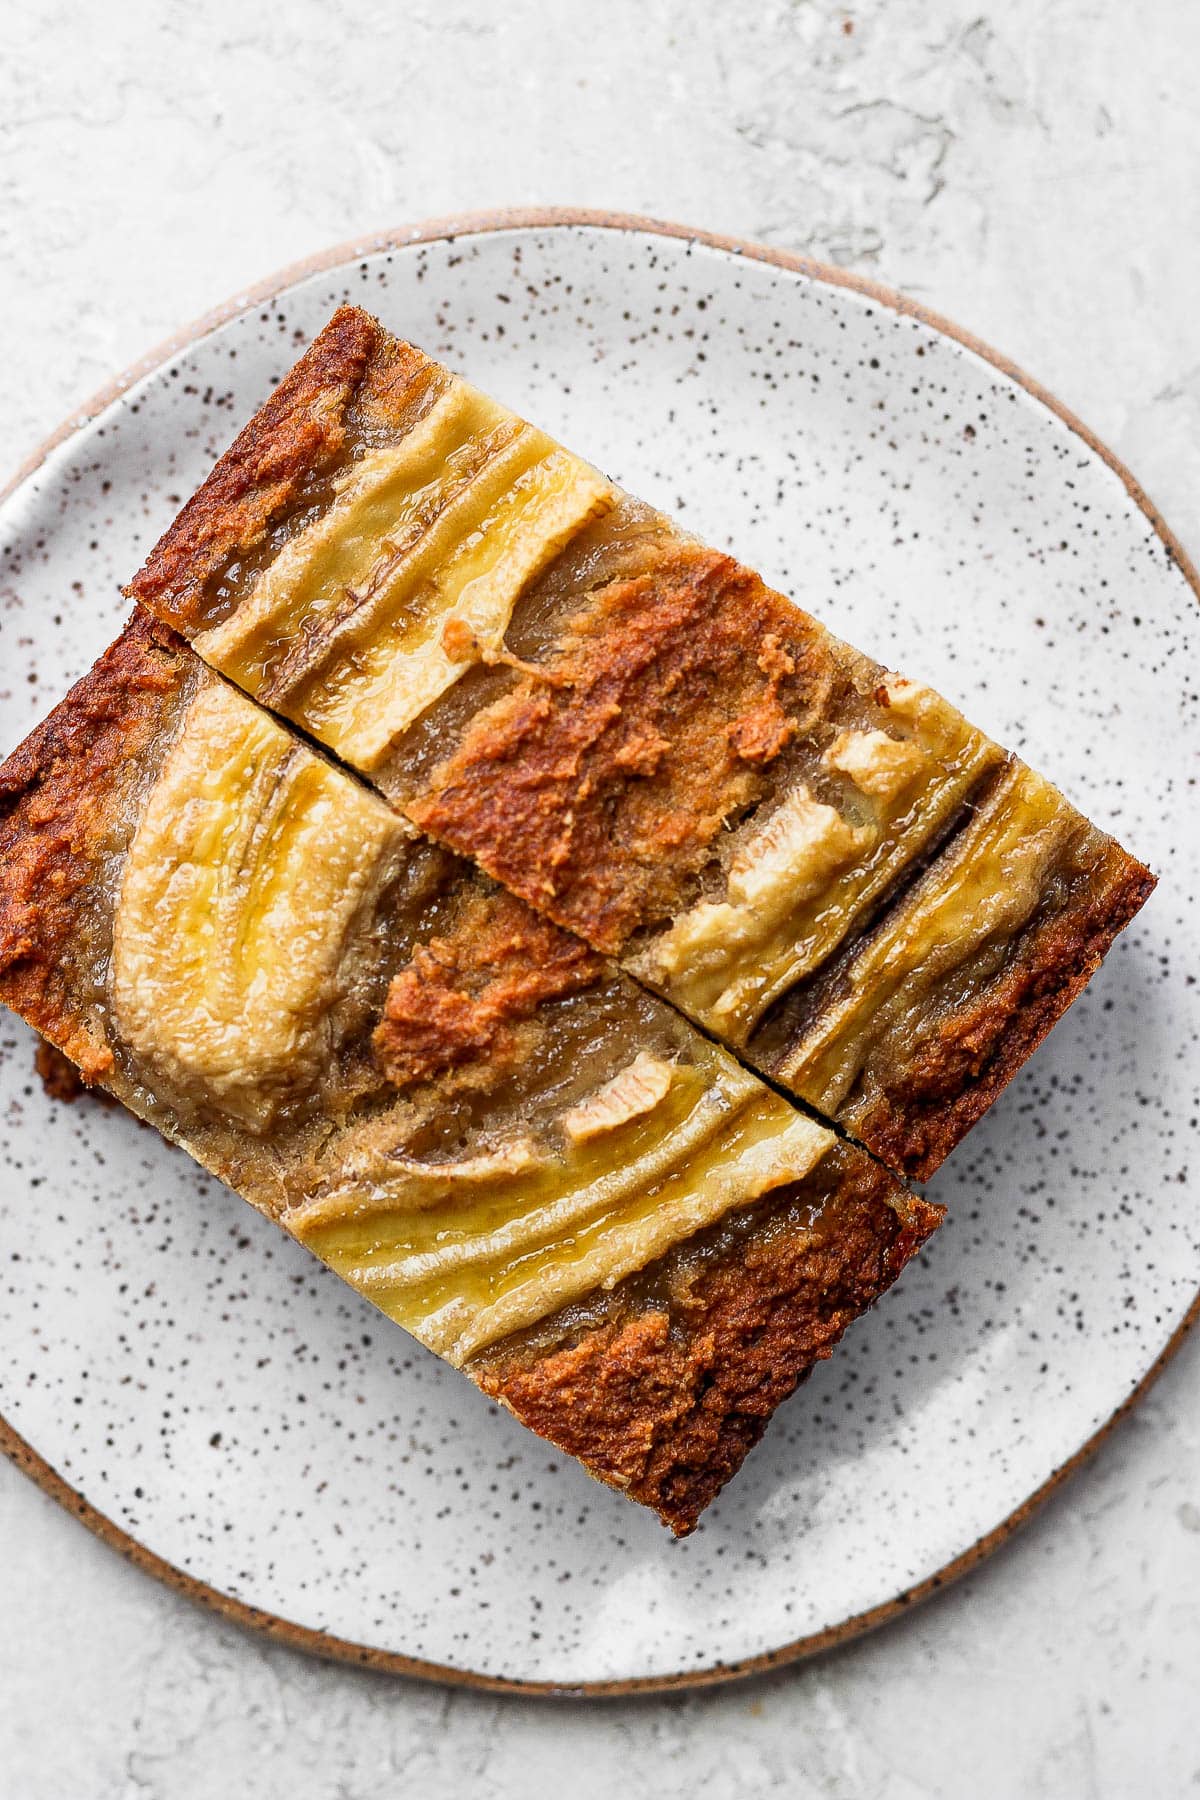 A plate with 2 slices of paleo banana bread.